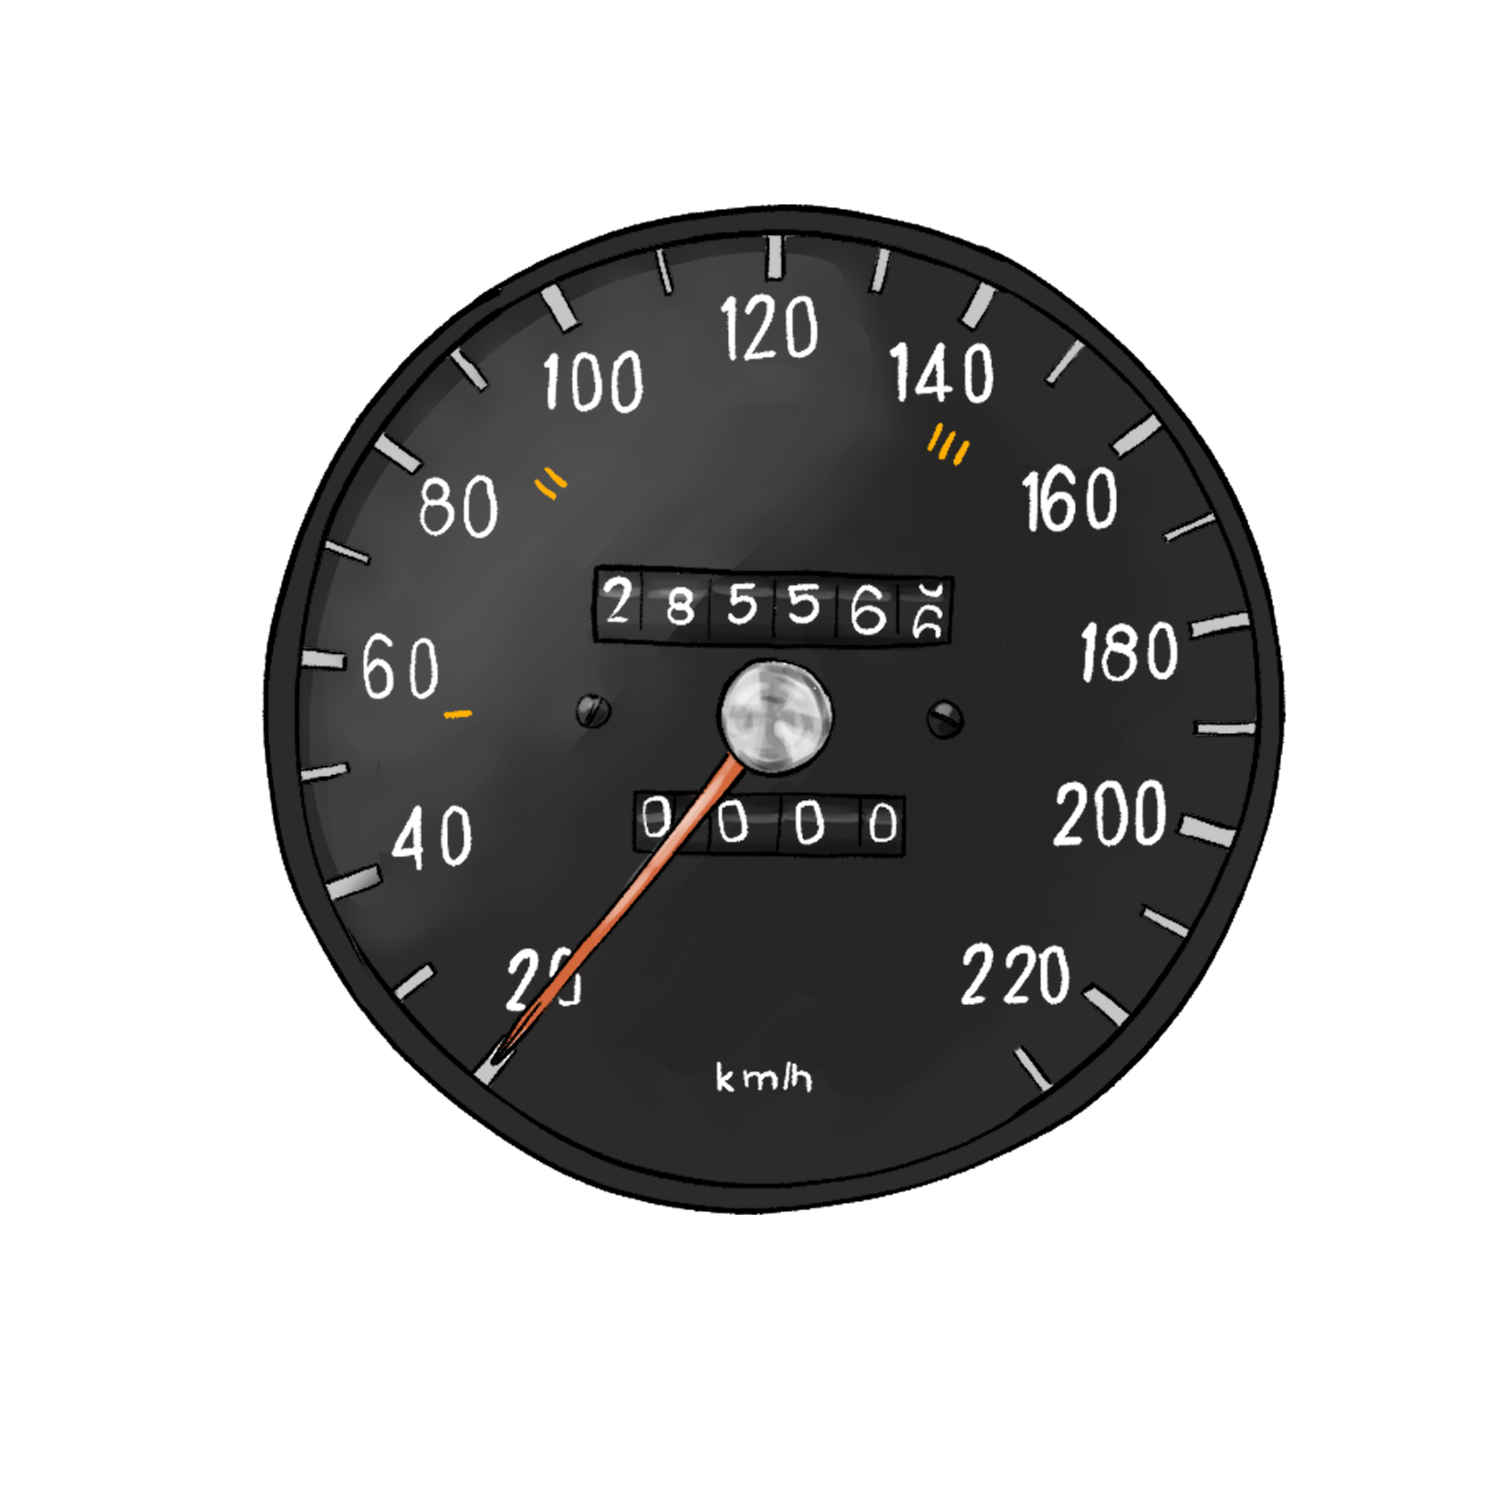  Product image 1 of the product “Standard car speedometer SPT51 ”